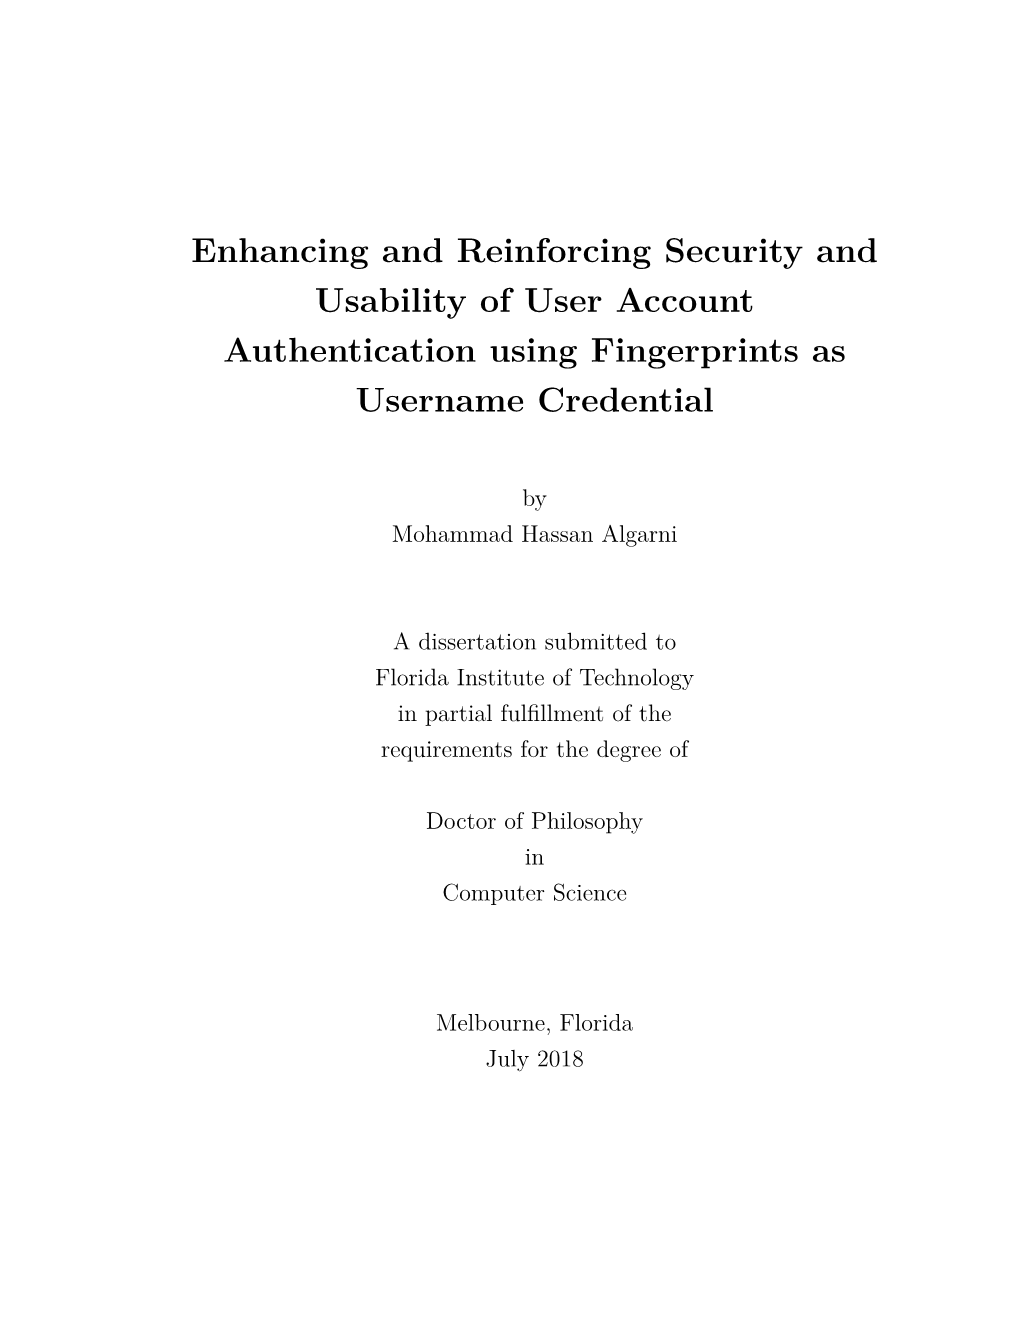 Enhancing and Reinforcing Security and Usability of User Account Authentication Using Fingerprints As Username Credential